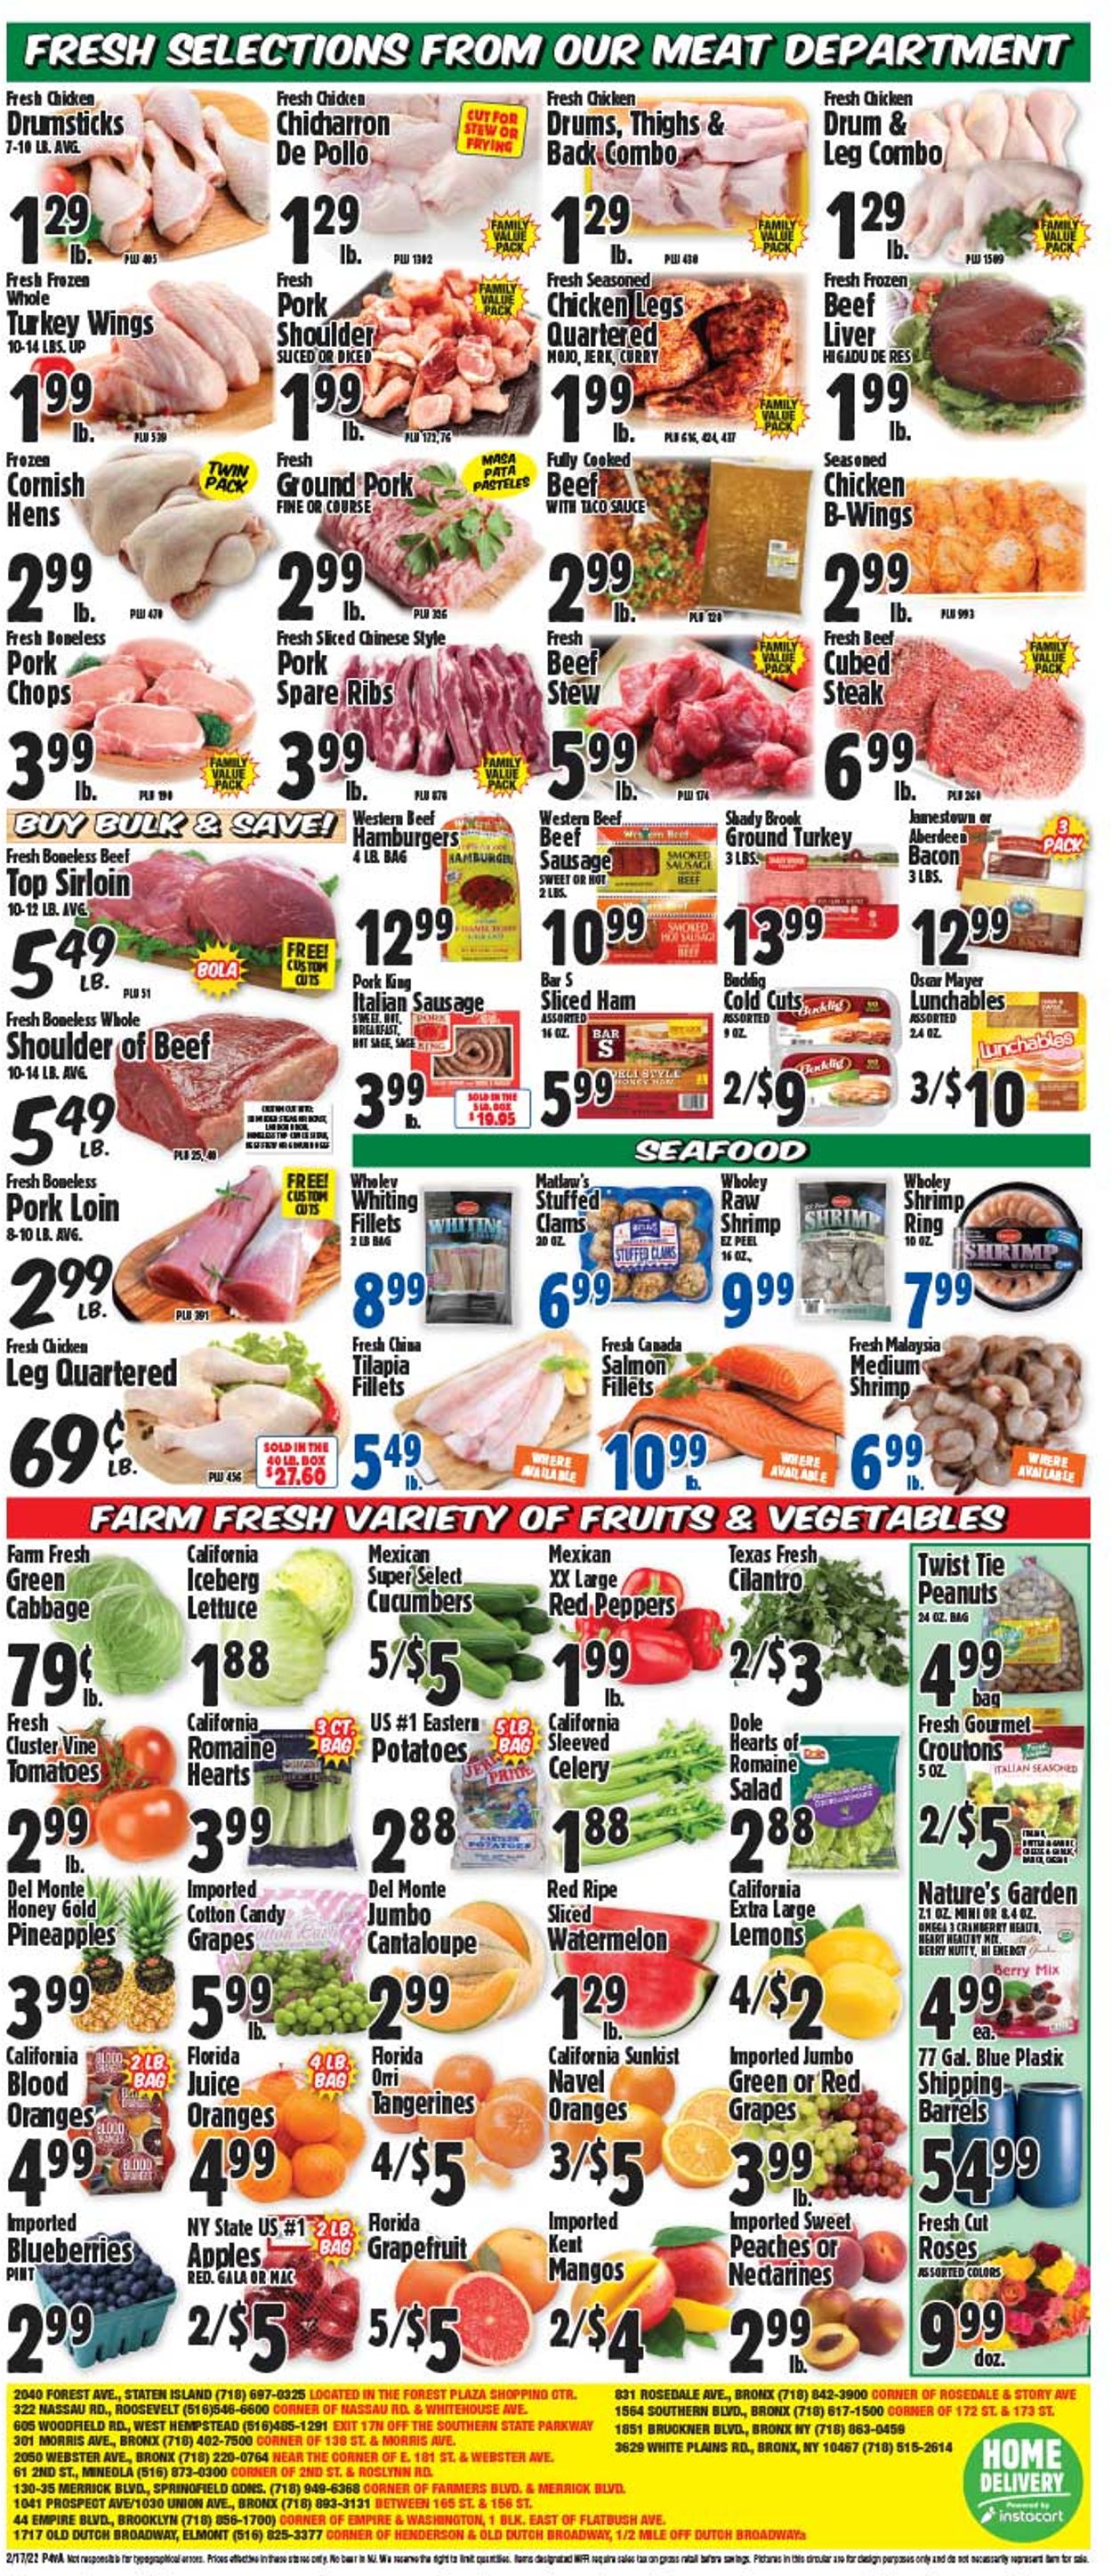 Western Beef Current weekly ad 02/17 - 02/23/2022 [3] - frequent-ads.com